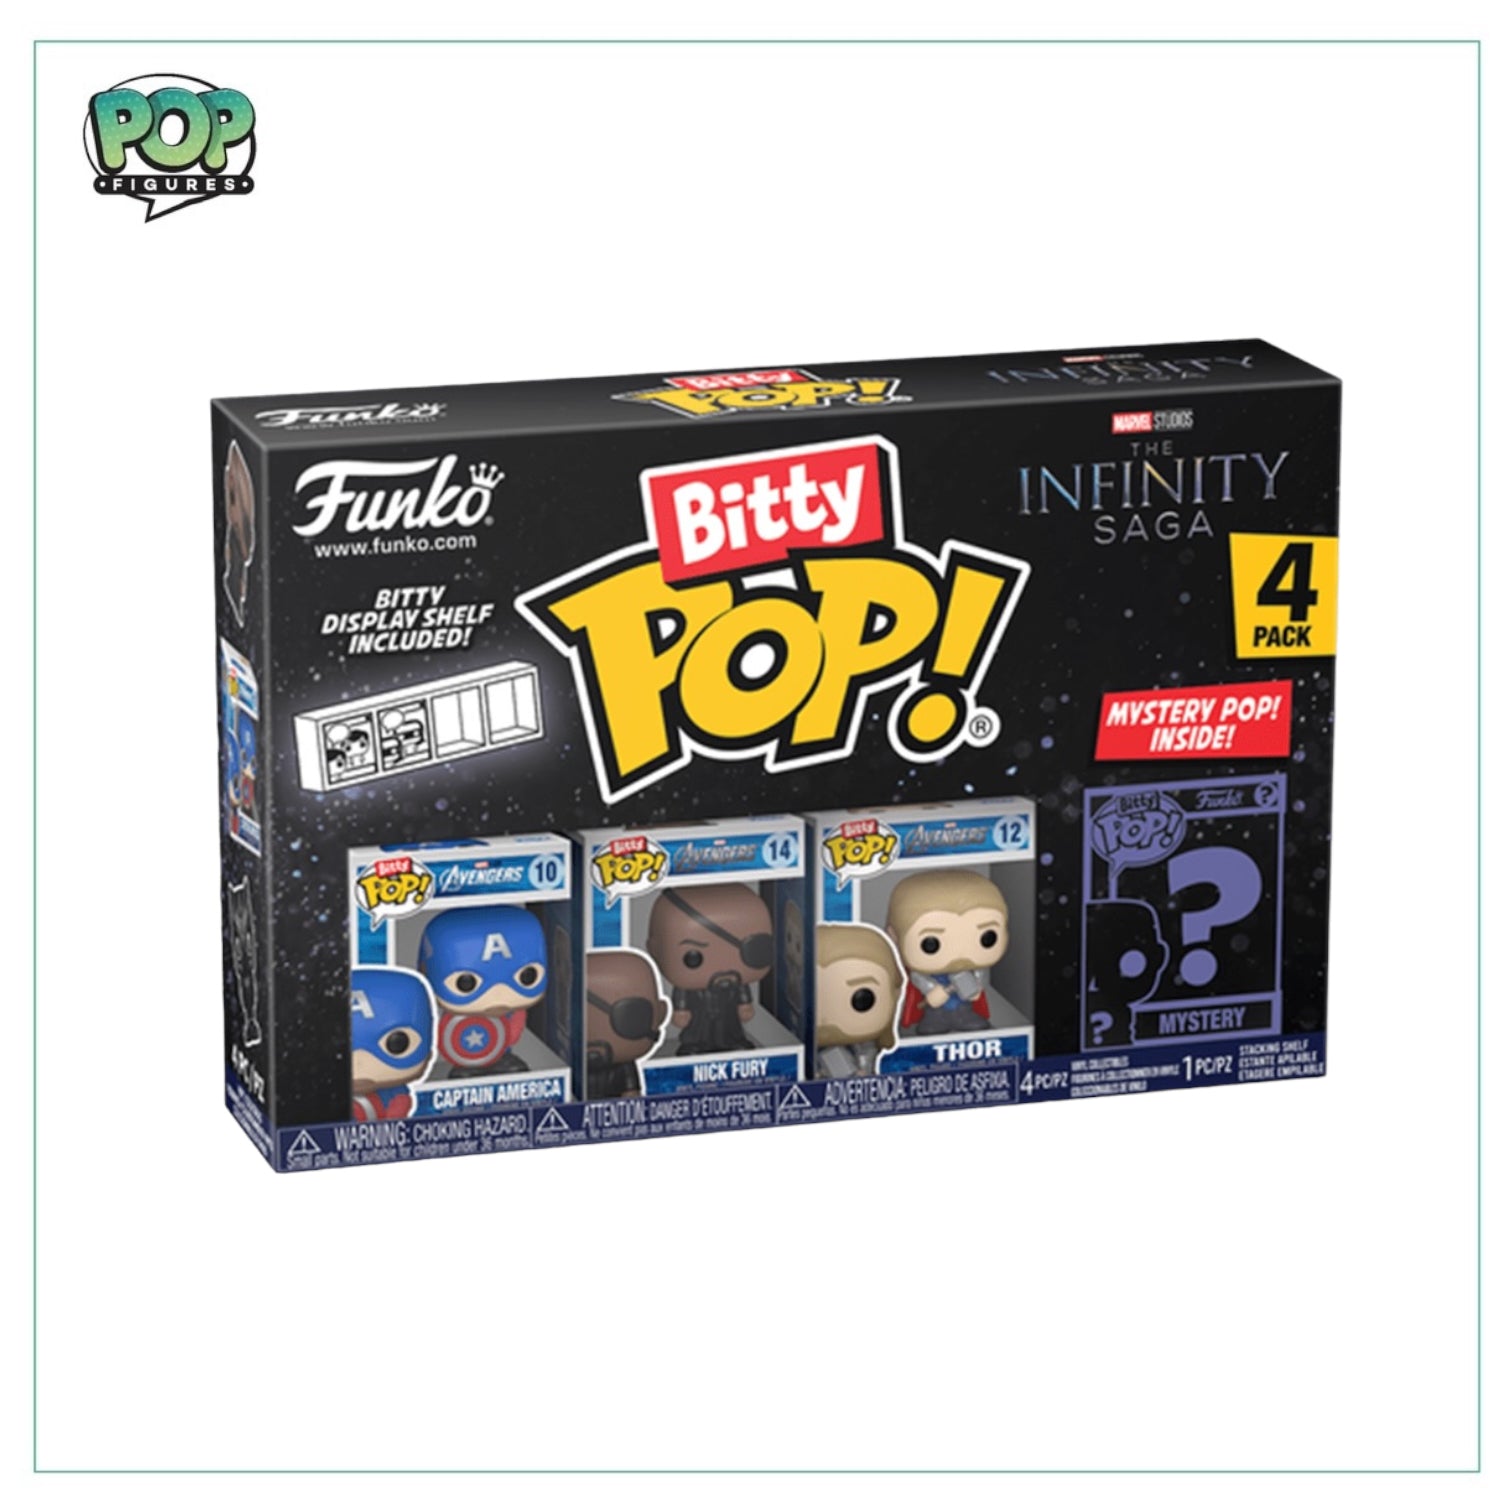 Captain America 4 pack Bitty POP! - The Infinity Saga - Chance of Chase